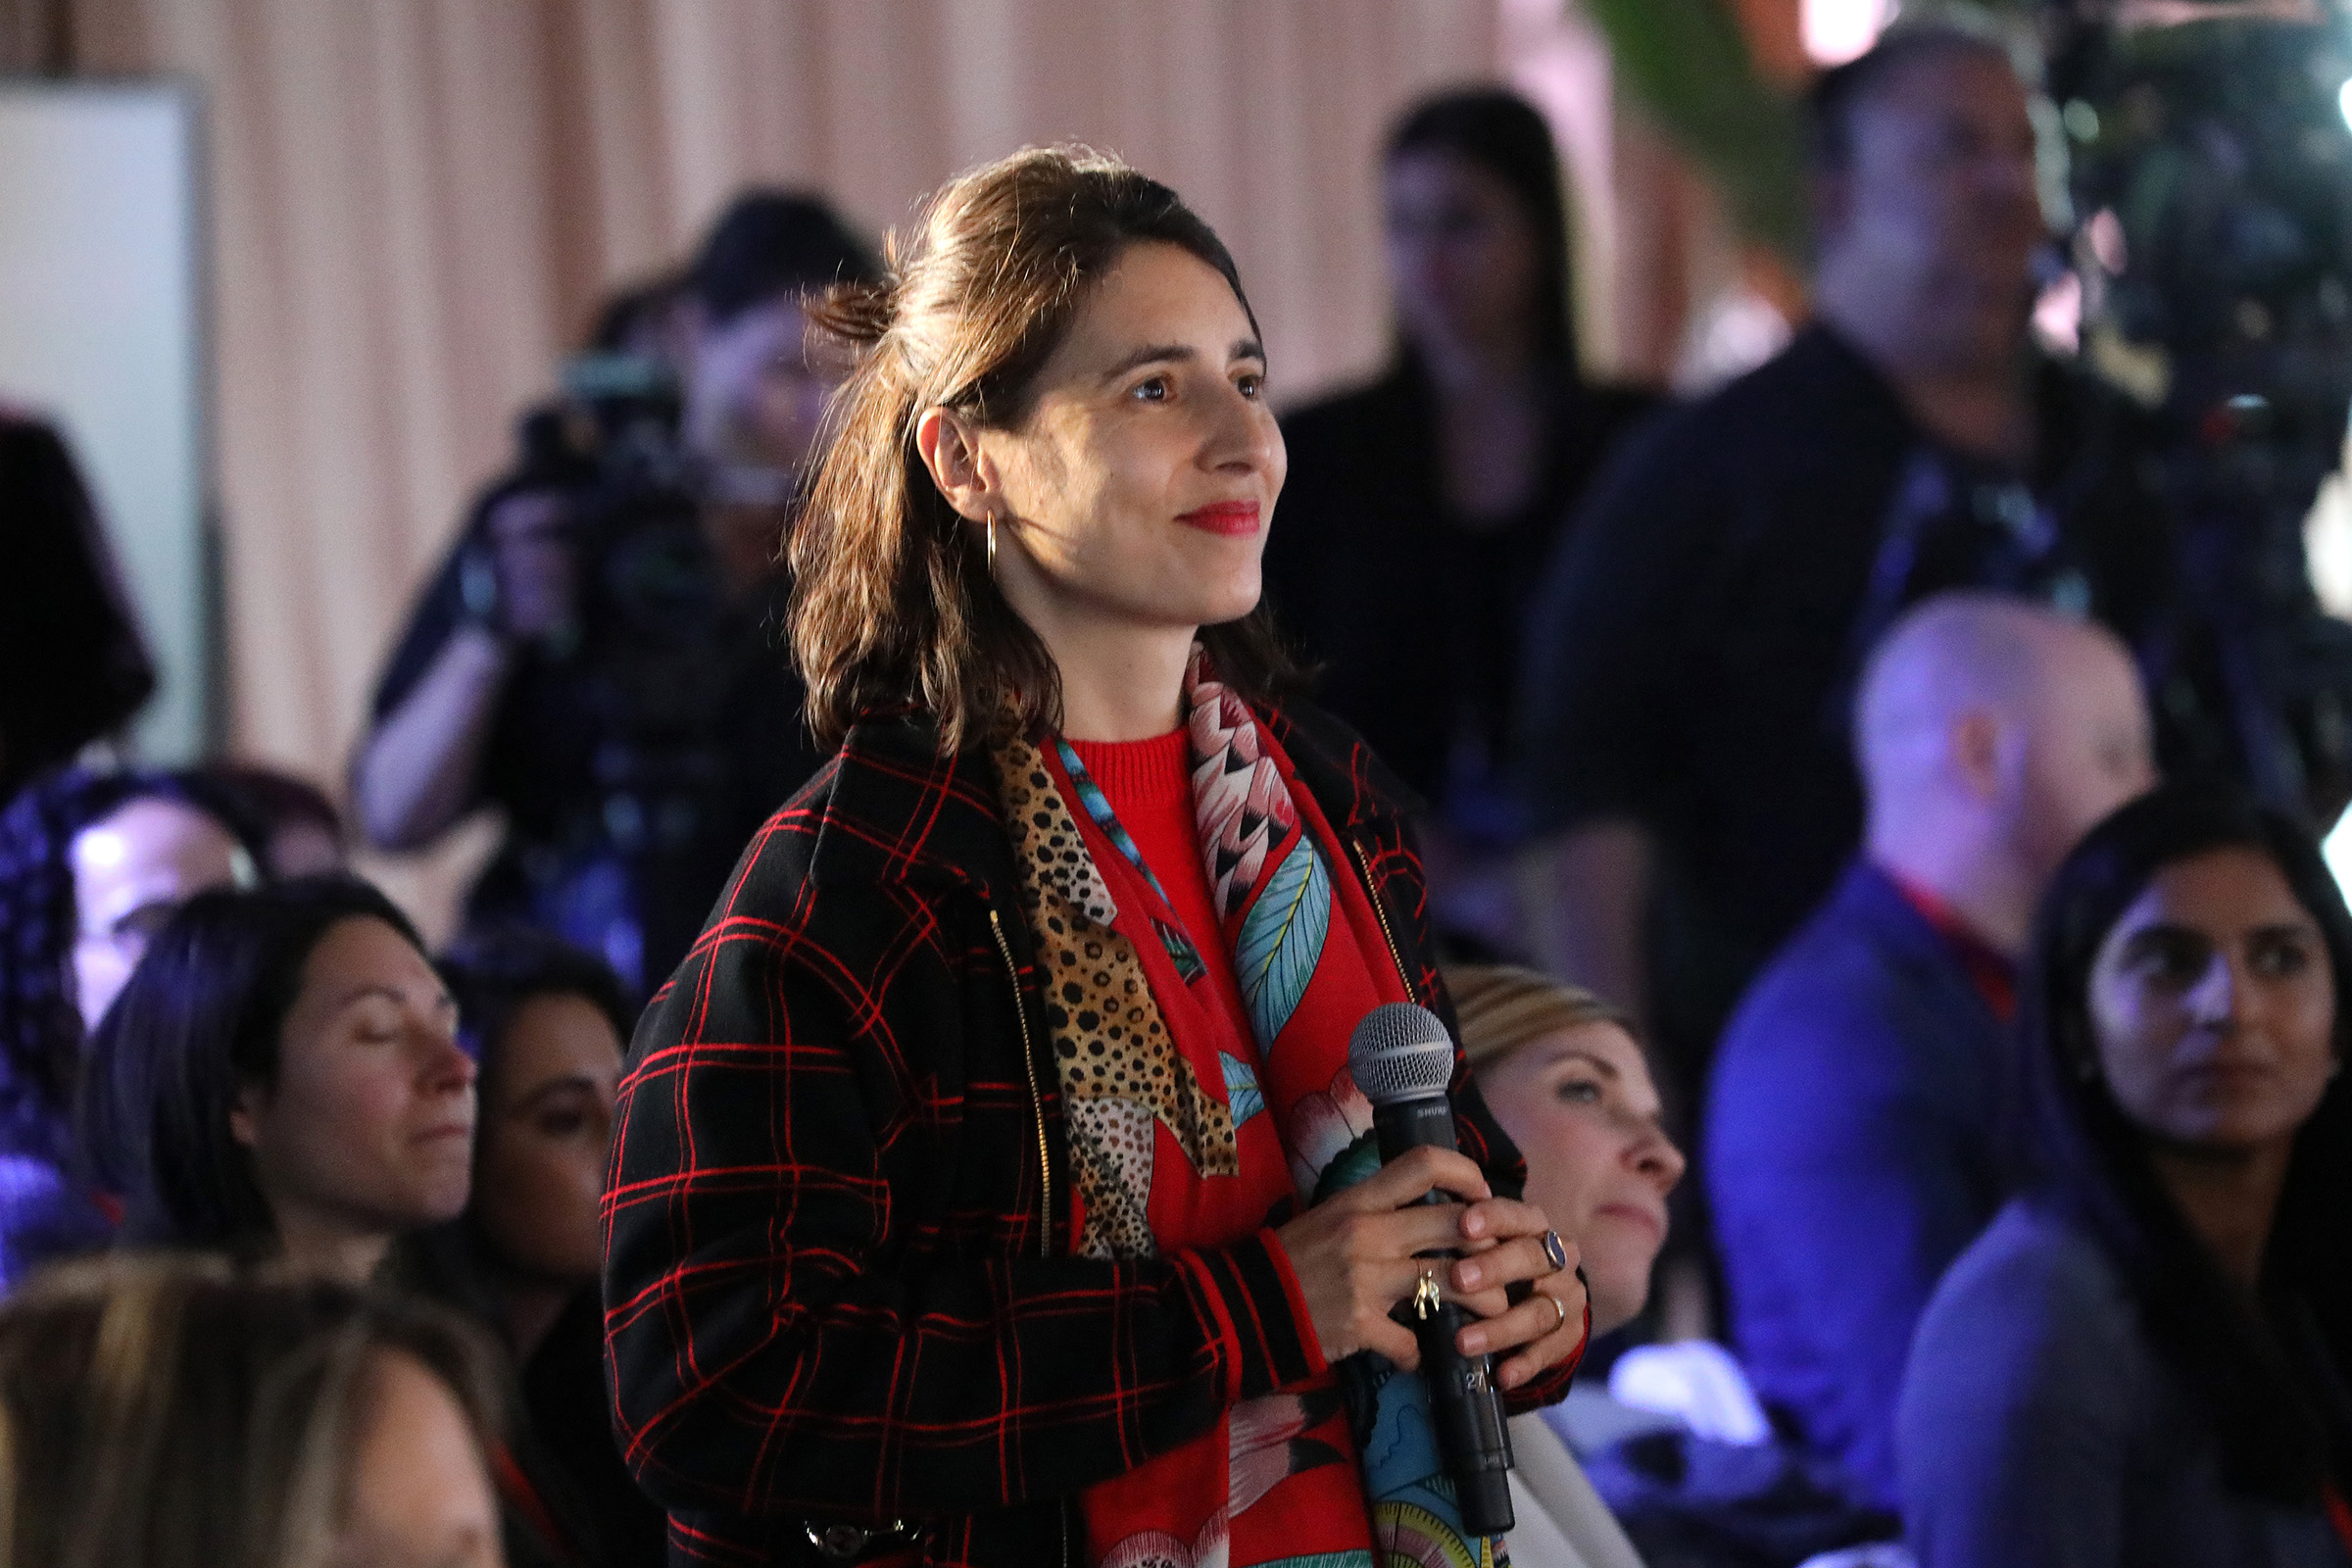 Artist Prune Nourry speaks from the audience during the TIME 100 Health Summit at Pier 17 in New York City on Oct. 17, 2019. (Brian Ach—Getty Images for TIME 100 Health)